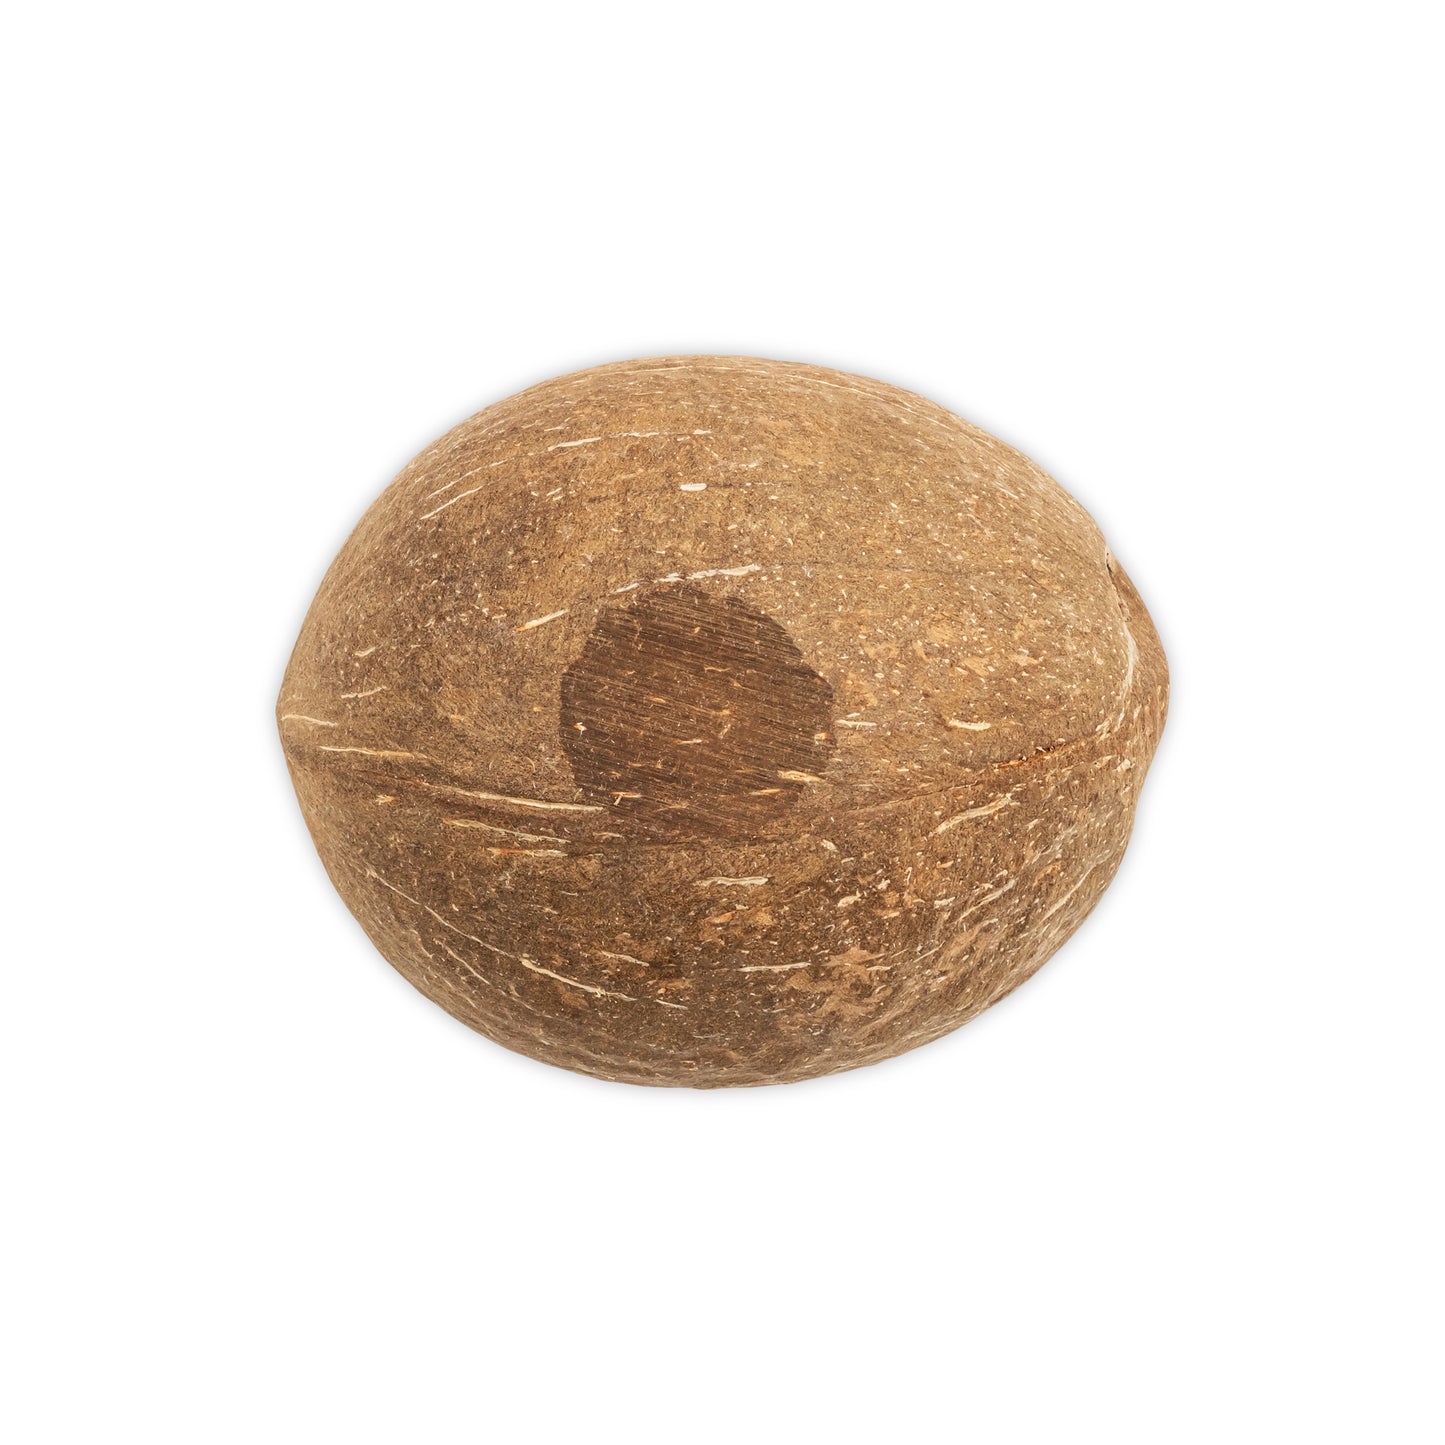 bottom of a coconut shell cup half oval